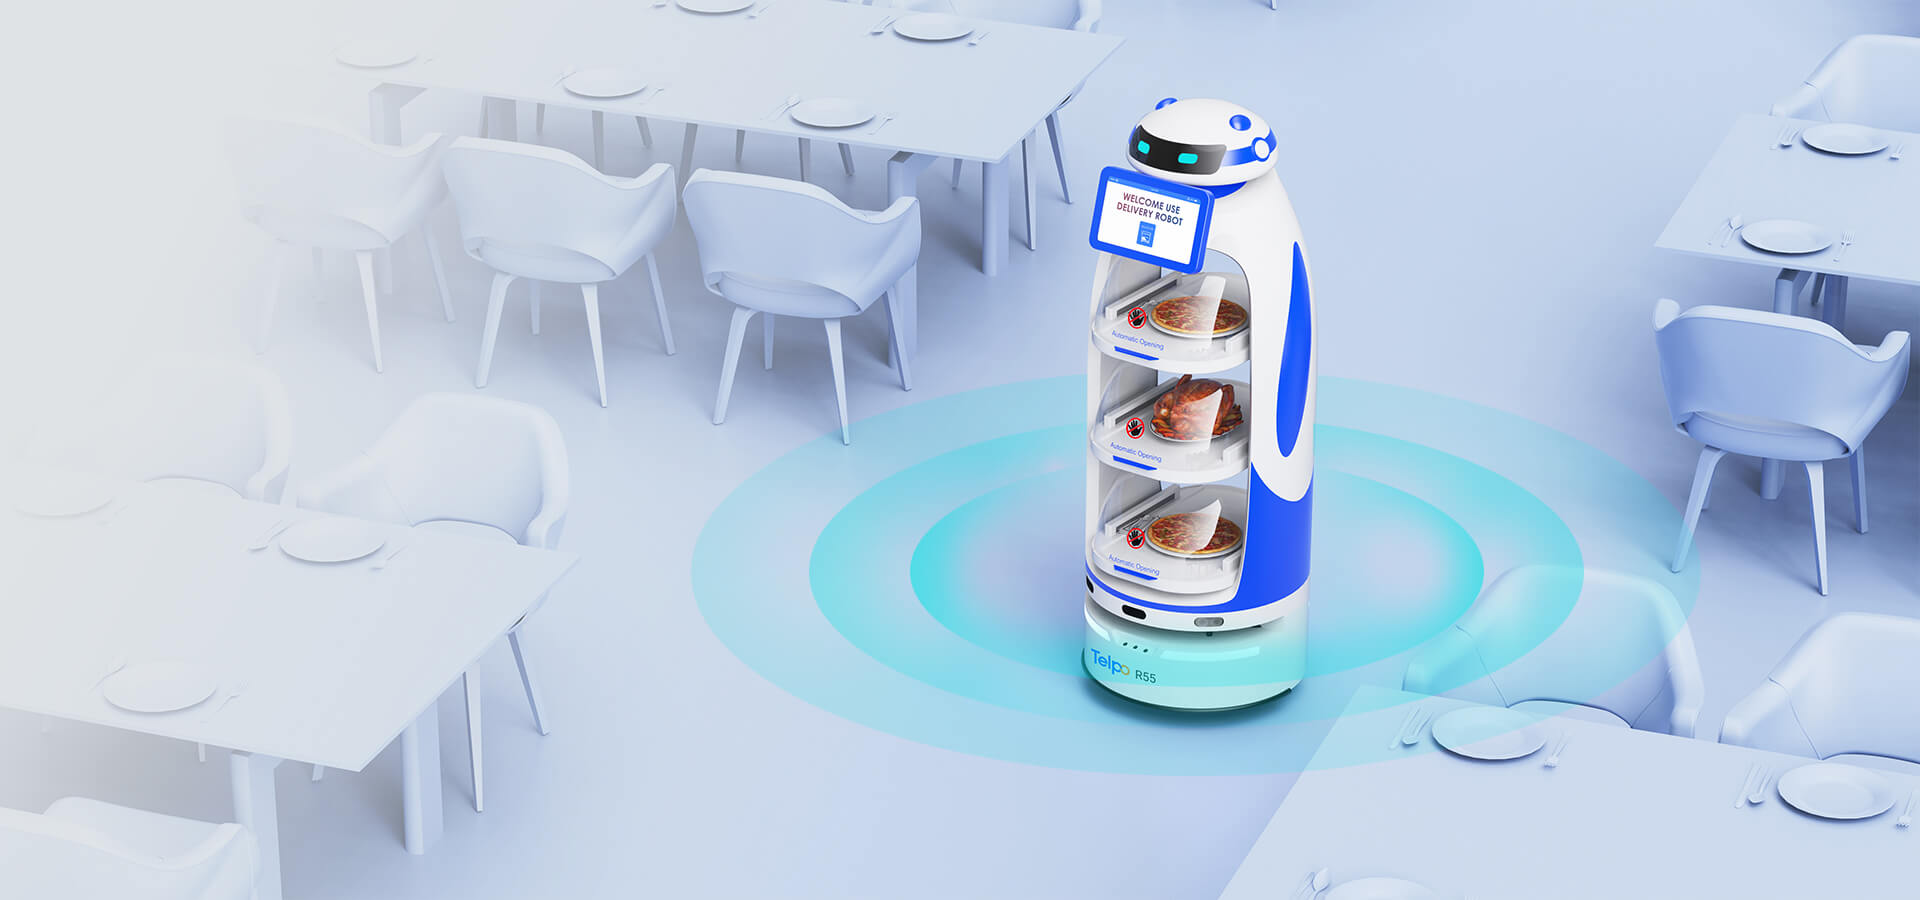 Robot waiter with SLAM positioning and easy to deployment